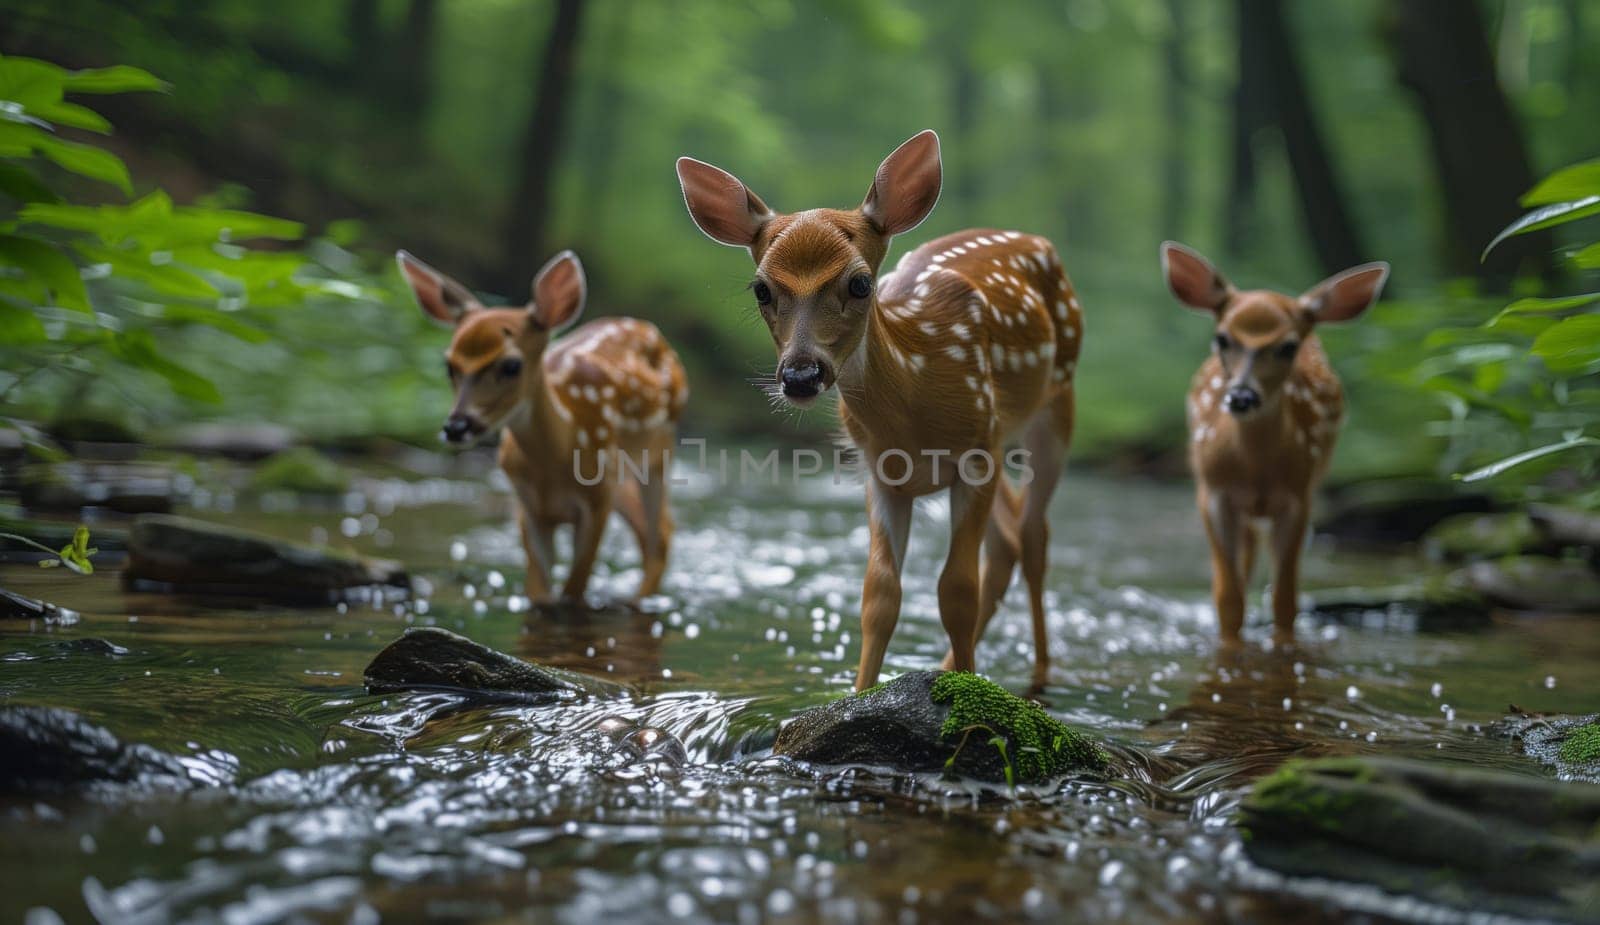 Three fawns are playfully standing in a stream surrounded by a natural landscape of grass and terrestrial plants in the woods